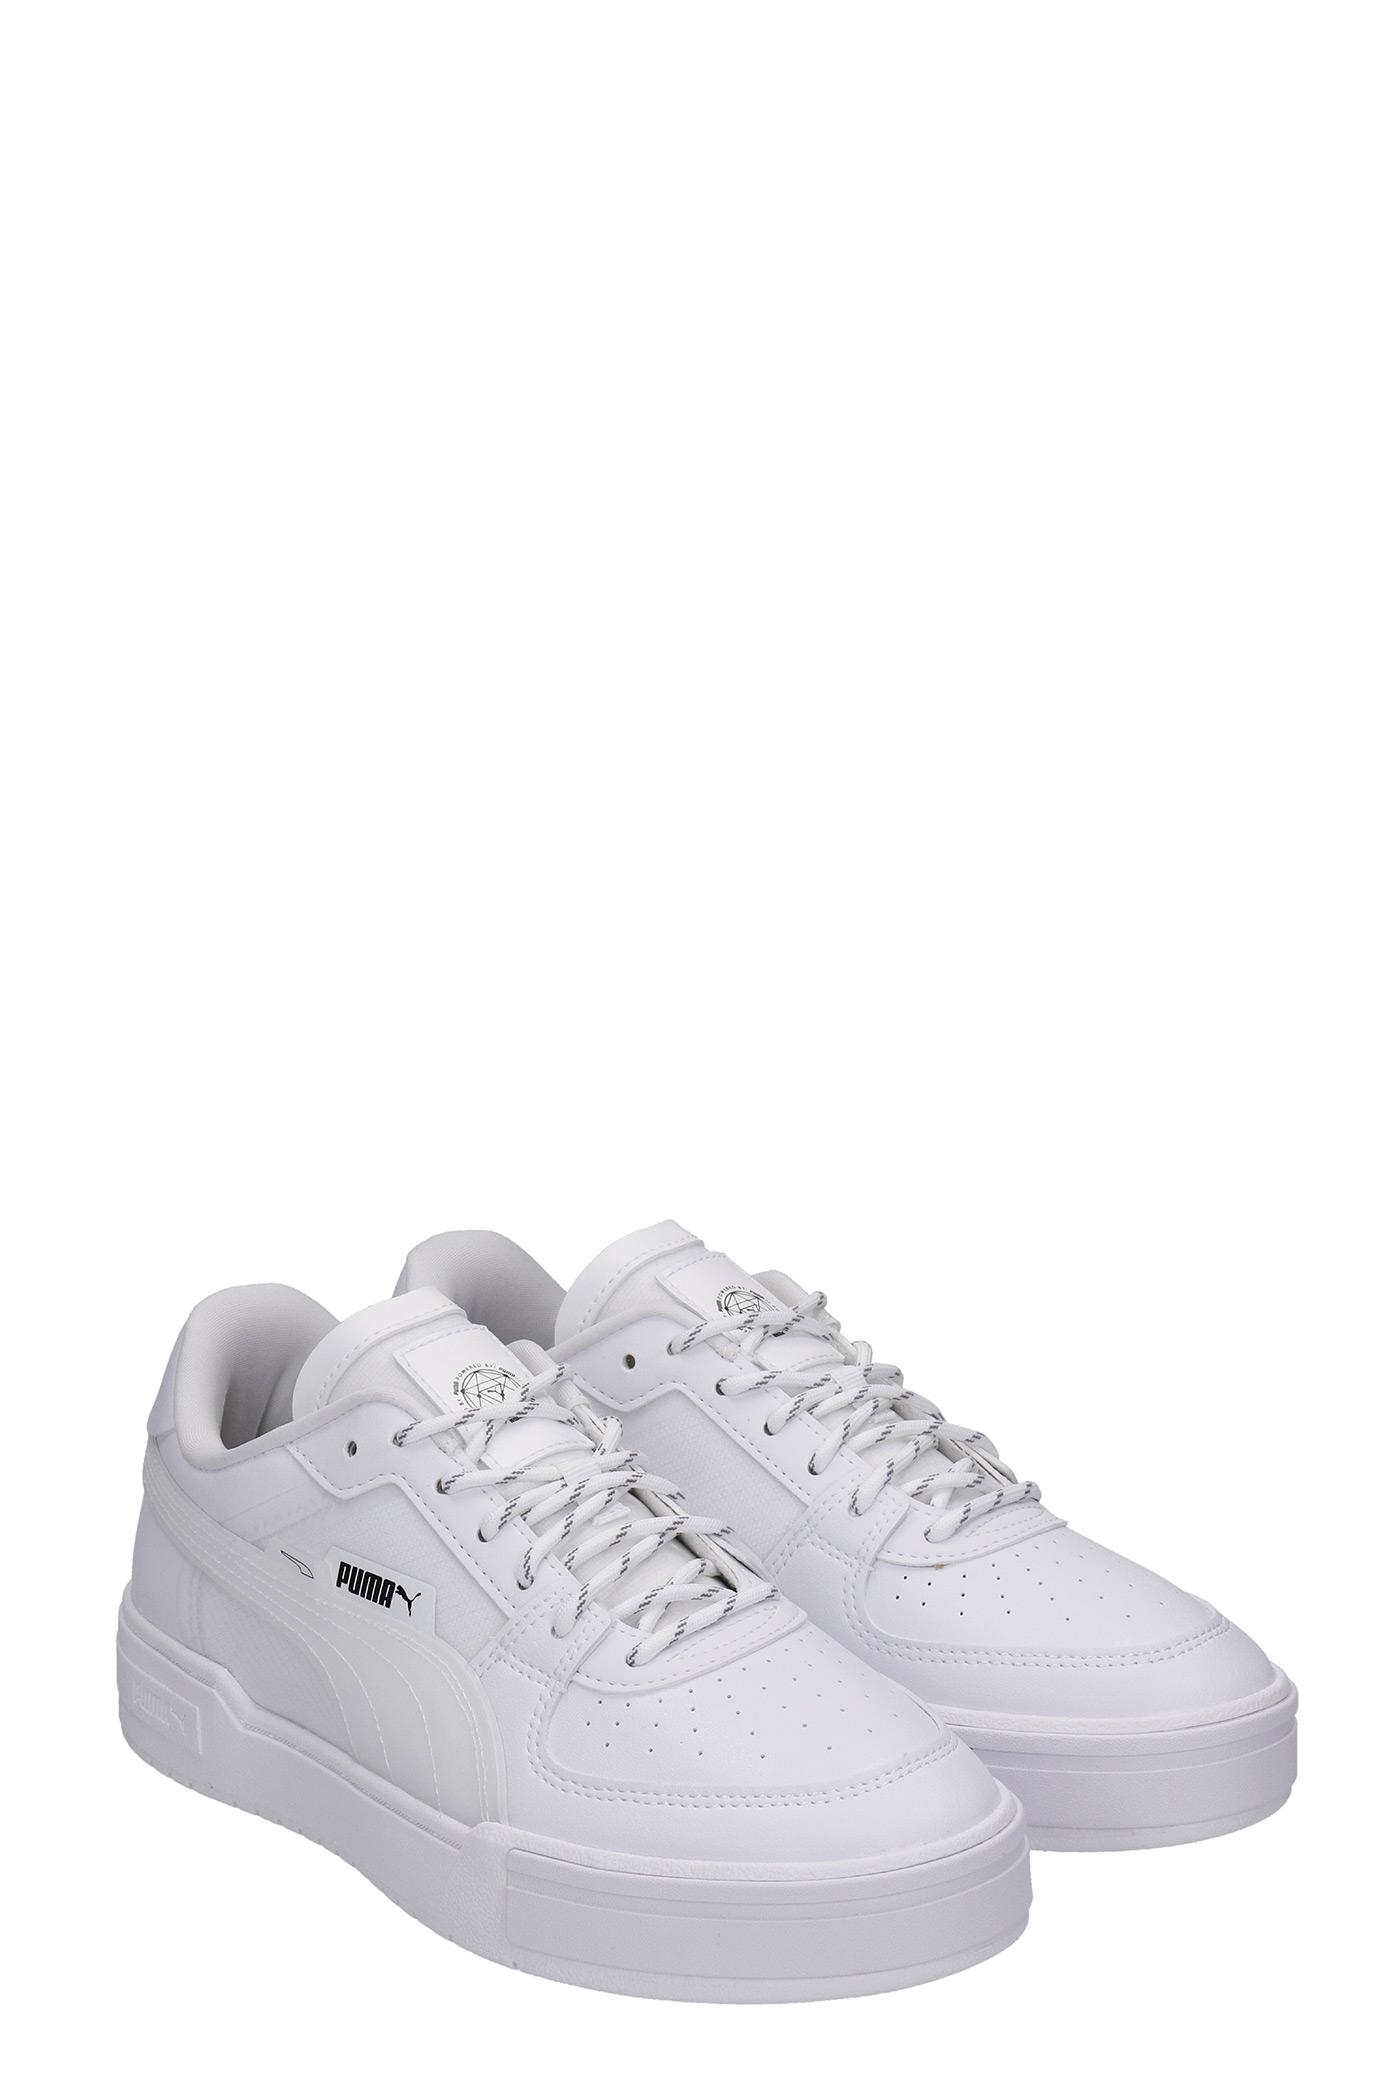 PUMA Ca Pro Ls Sneakers In White Leather for Men | Lyst